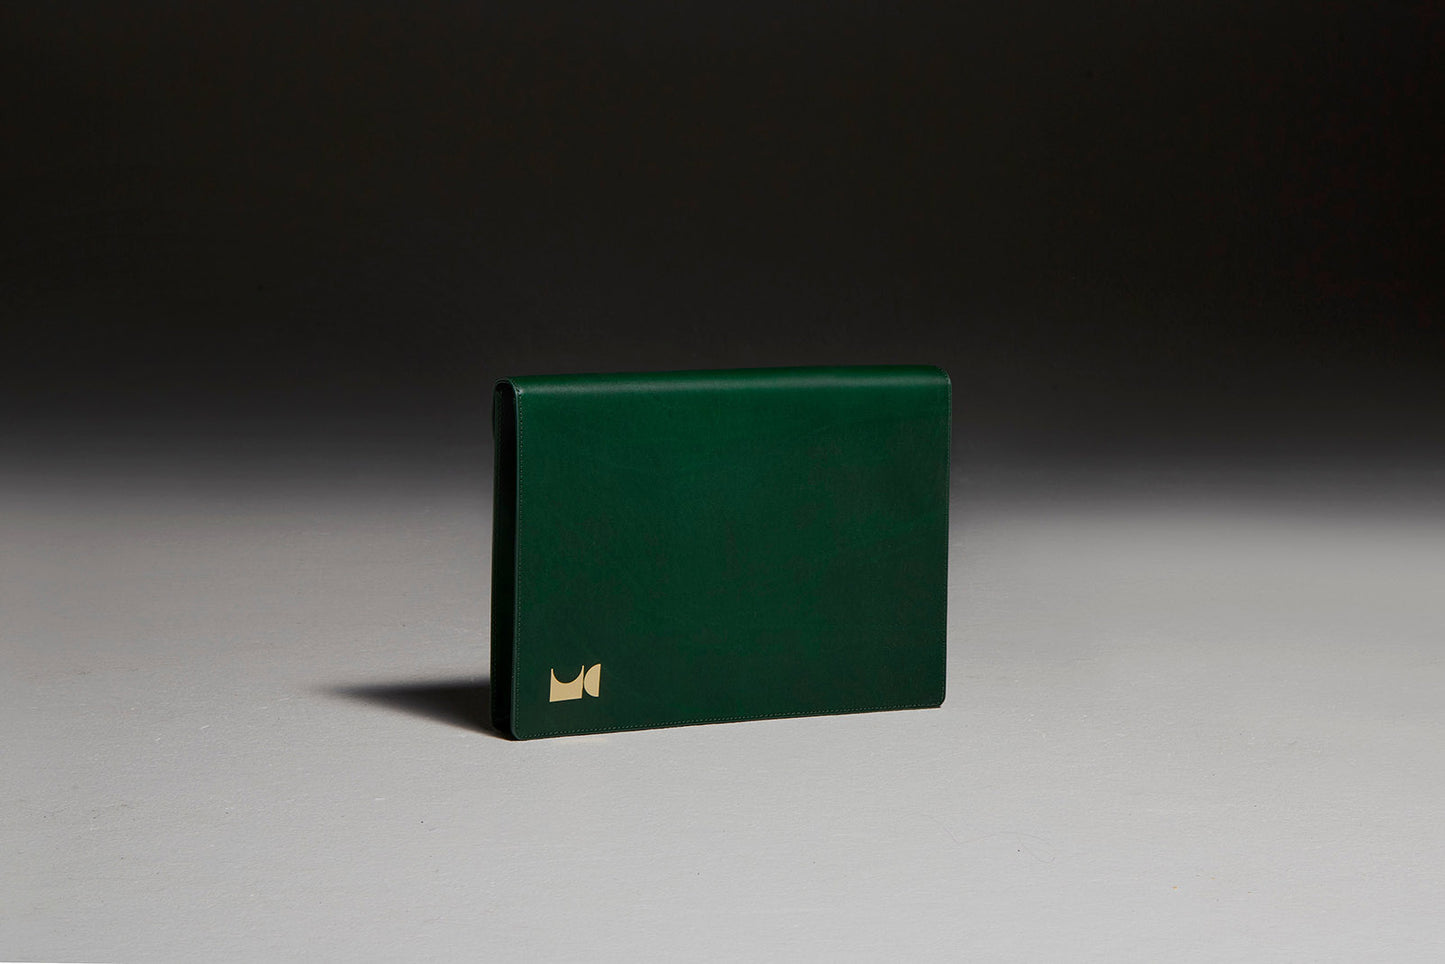 Green leather document folio sitting in front of black backdrop